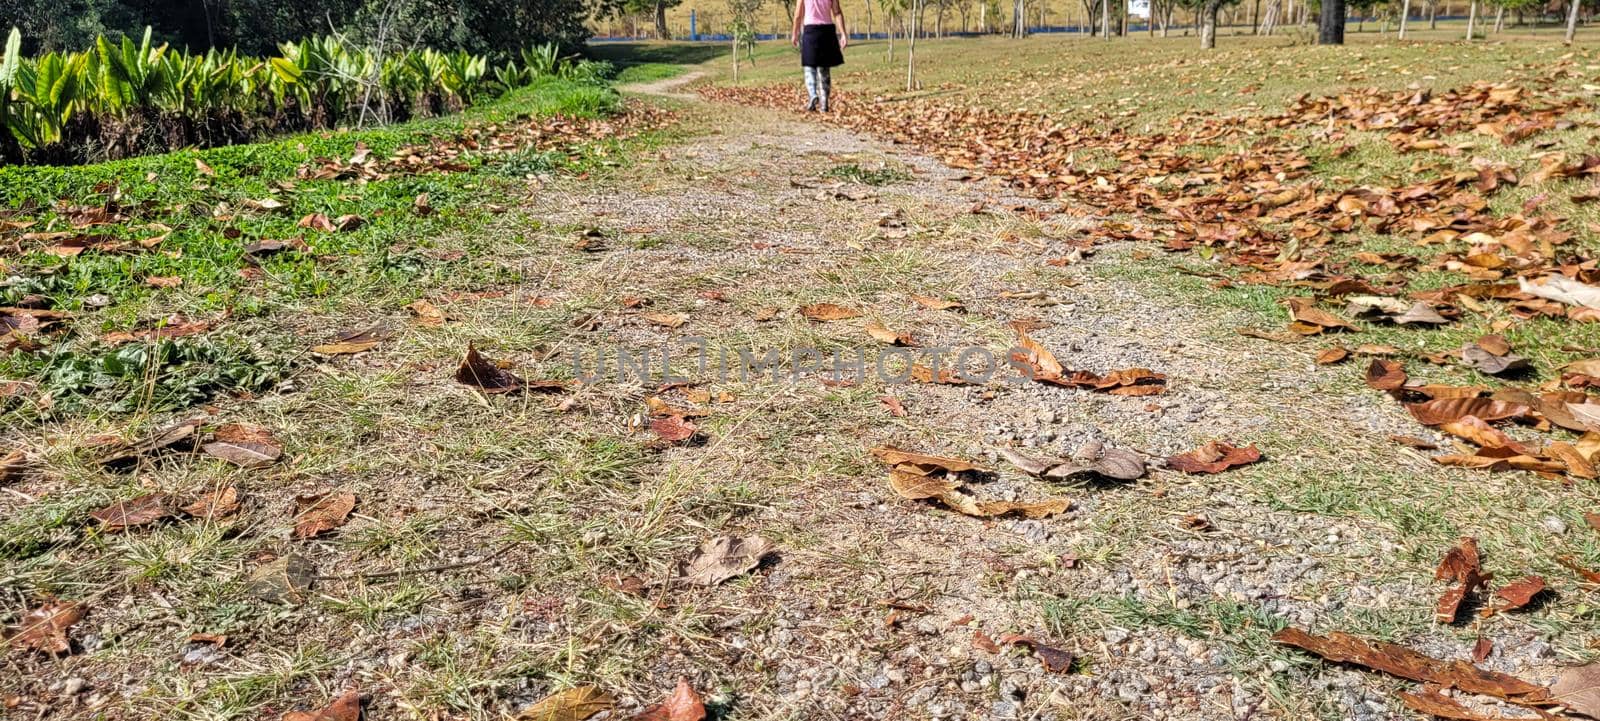 dry autumn winter leaves in park by sarsa